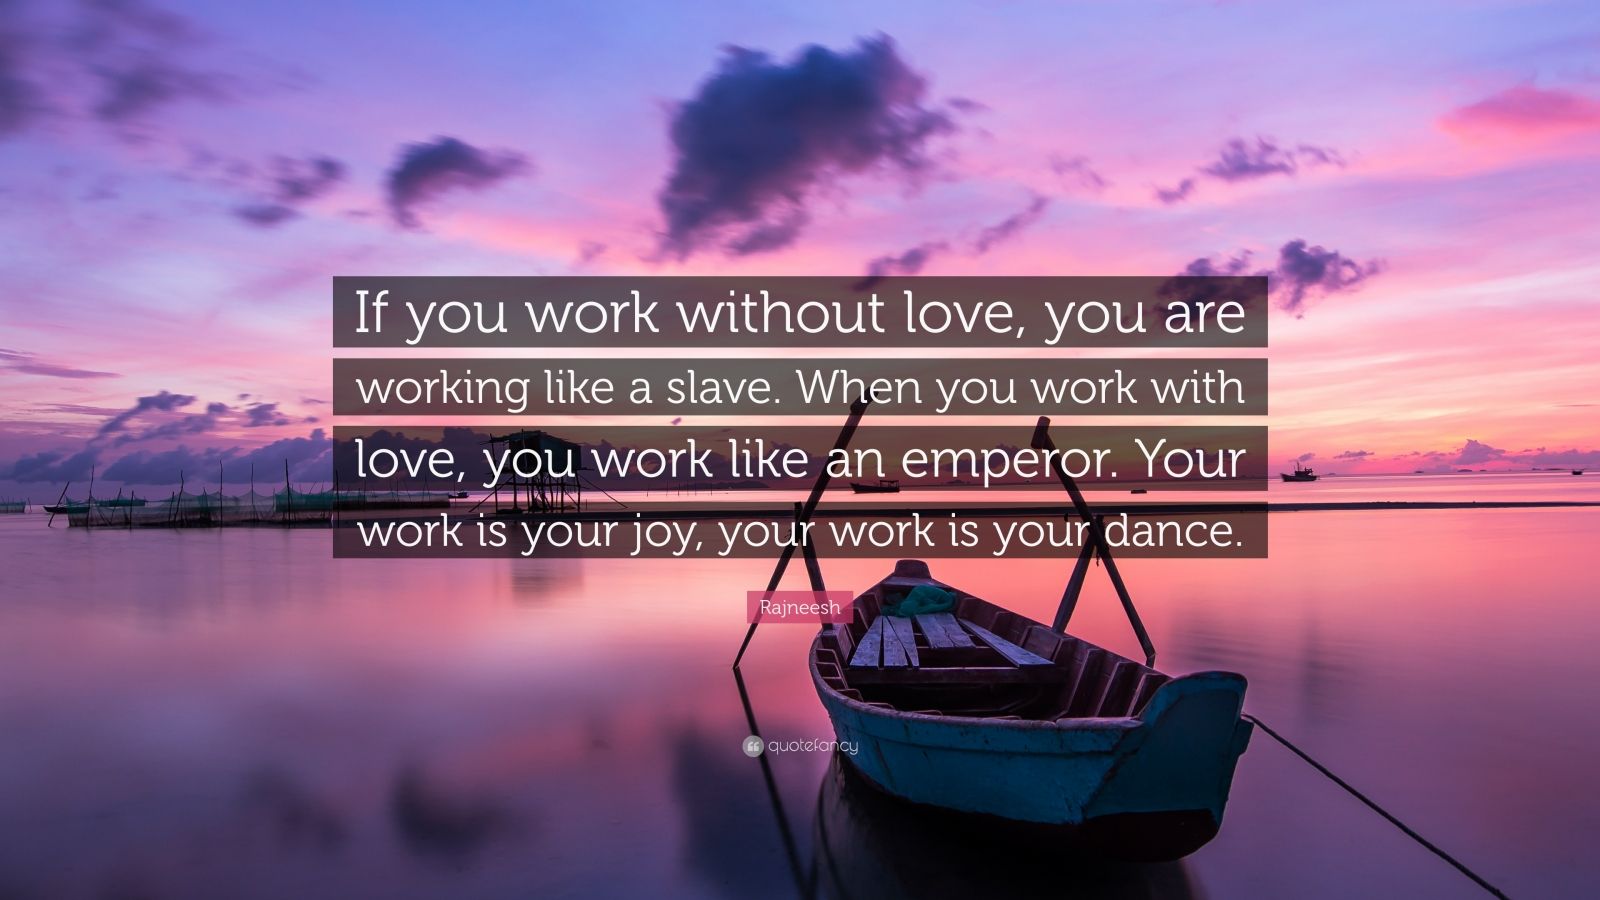 Rajneesh Quote: “If you work without love, you are working like a slave